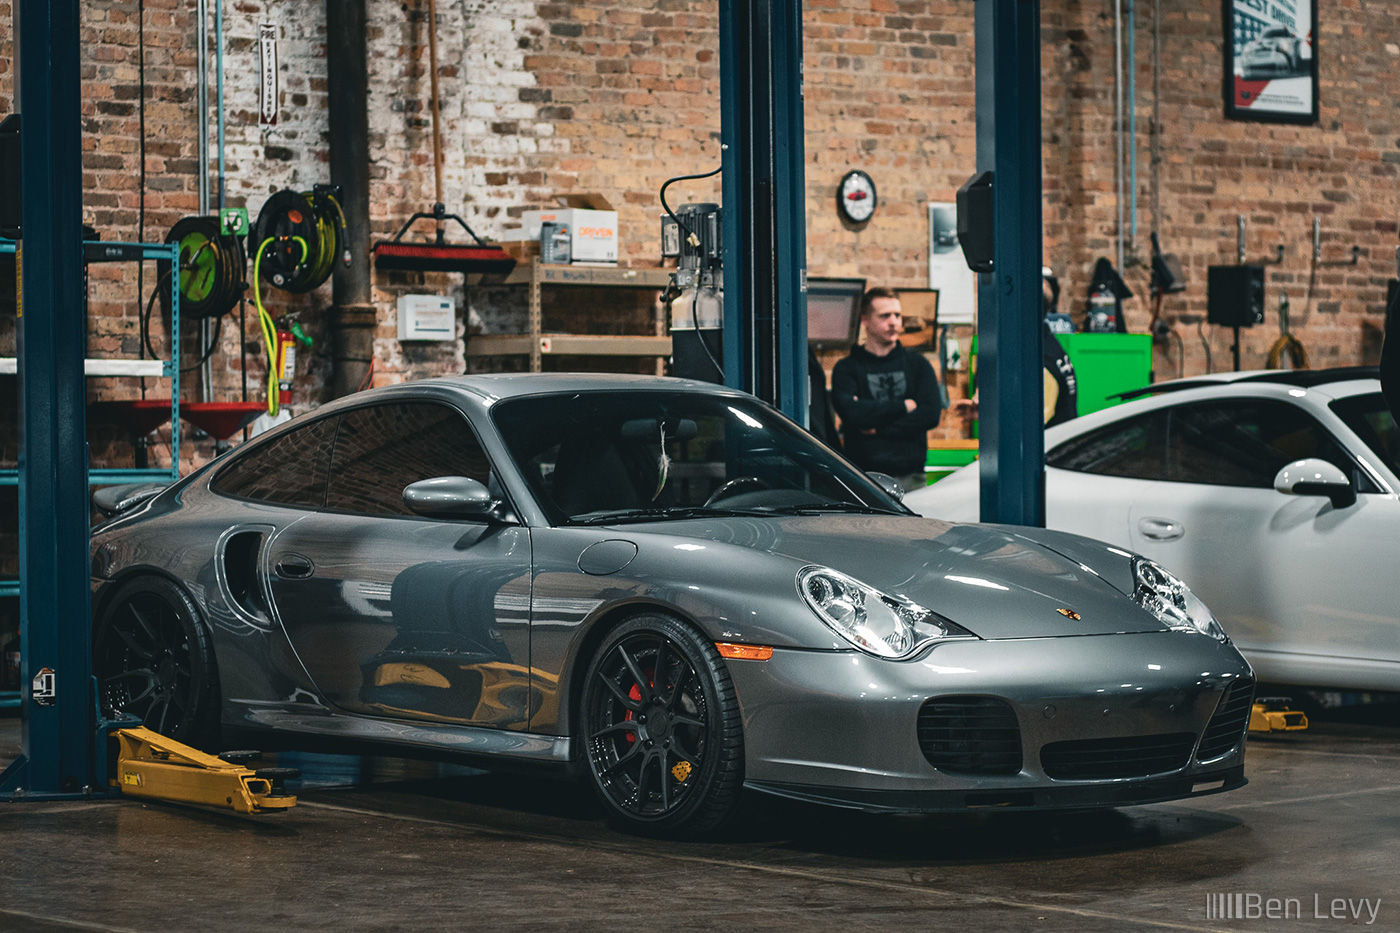 Grey Porsche 911 Turbo at Midwest Performance Cars